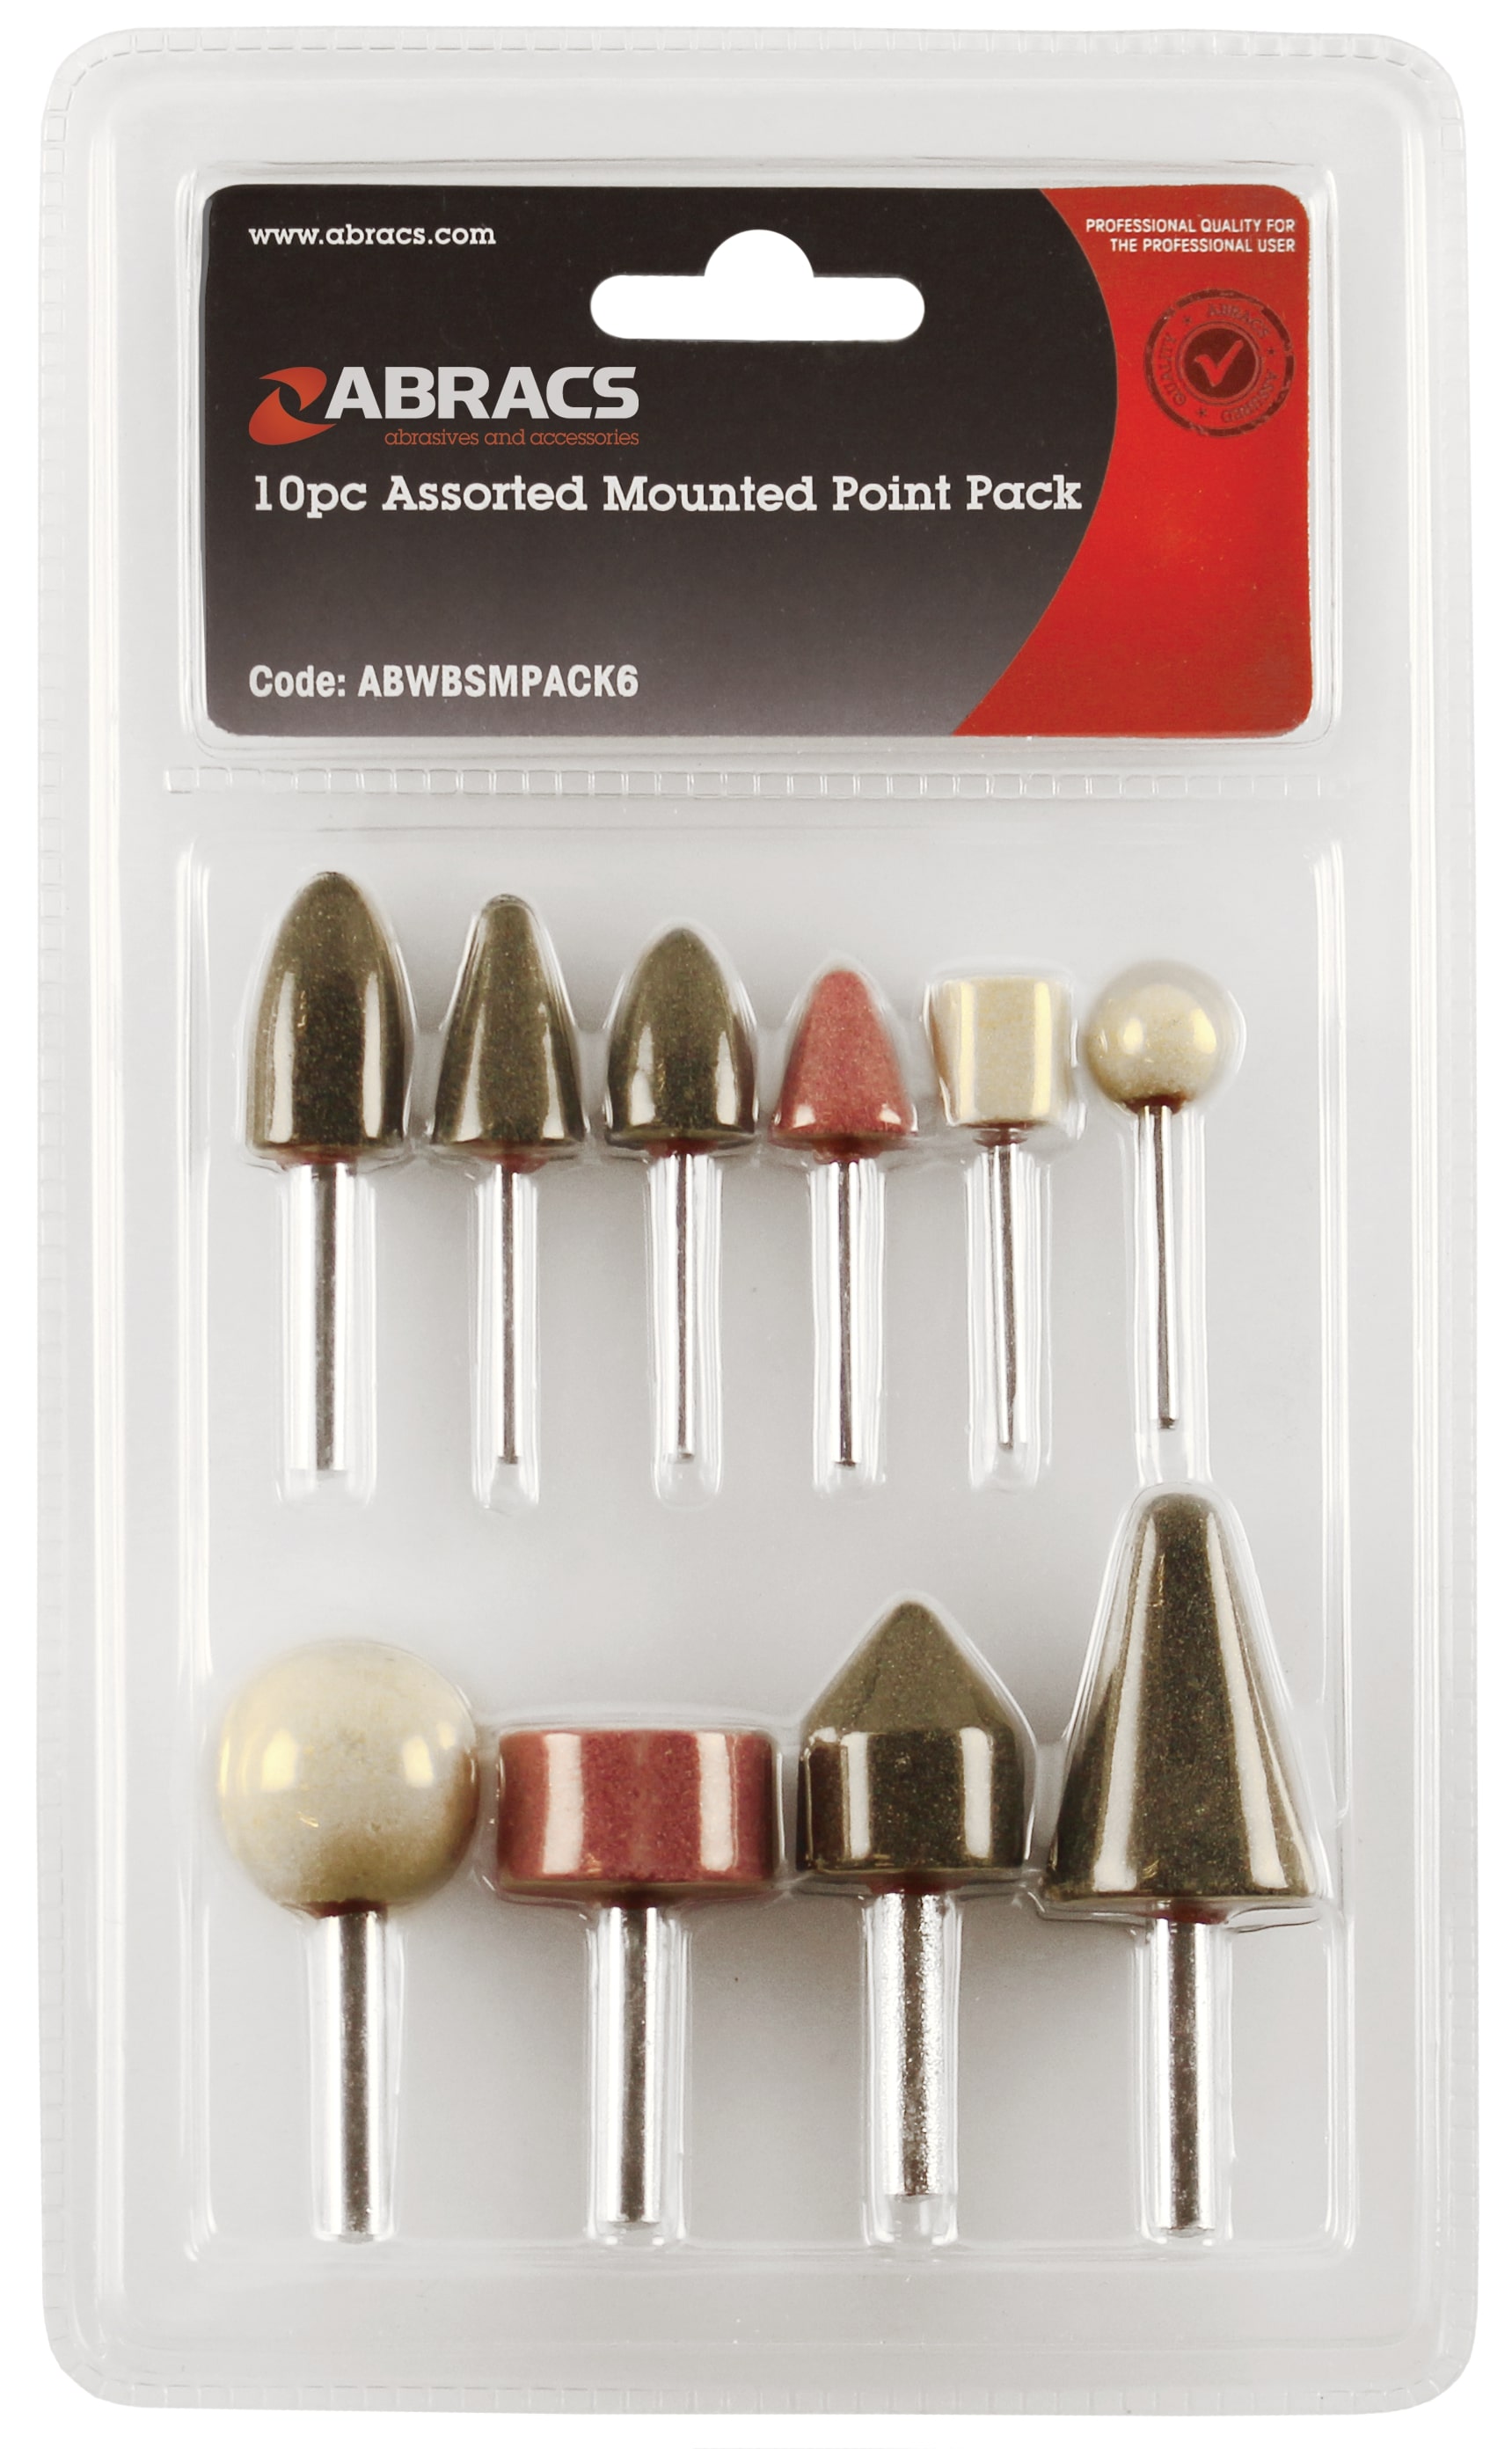 Abracs  10pc ASSORTED MOUNTED POINT PACK